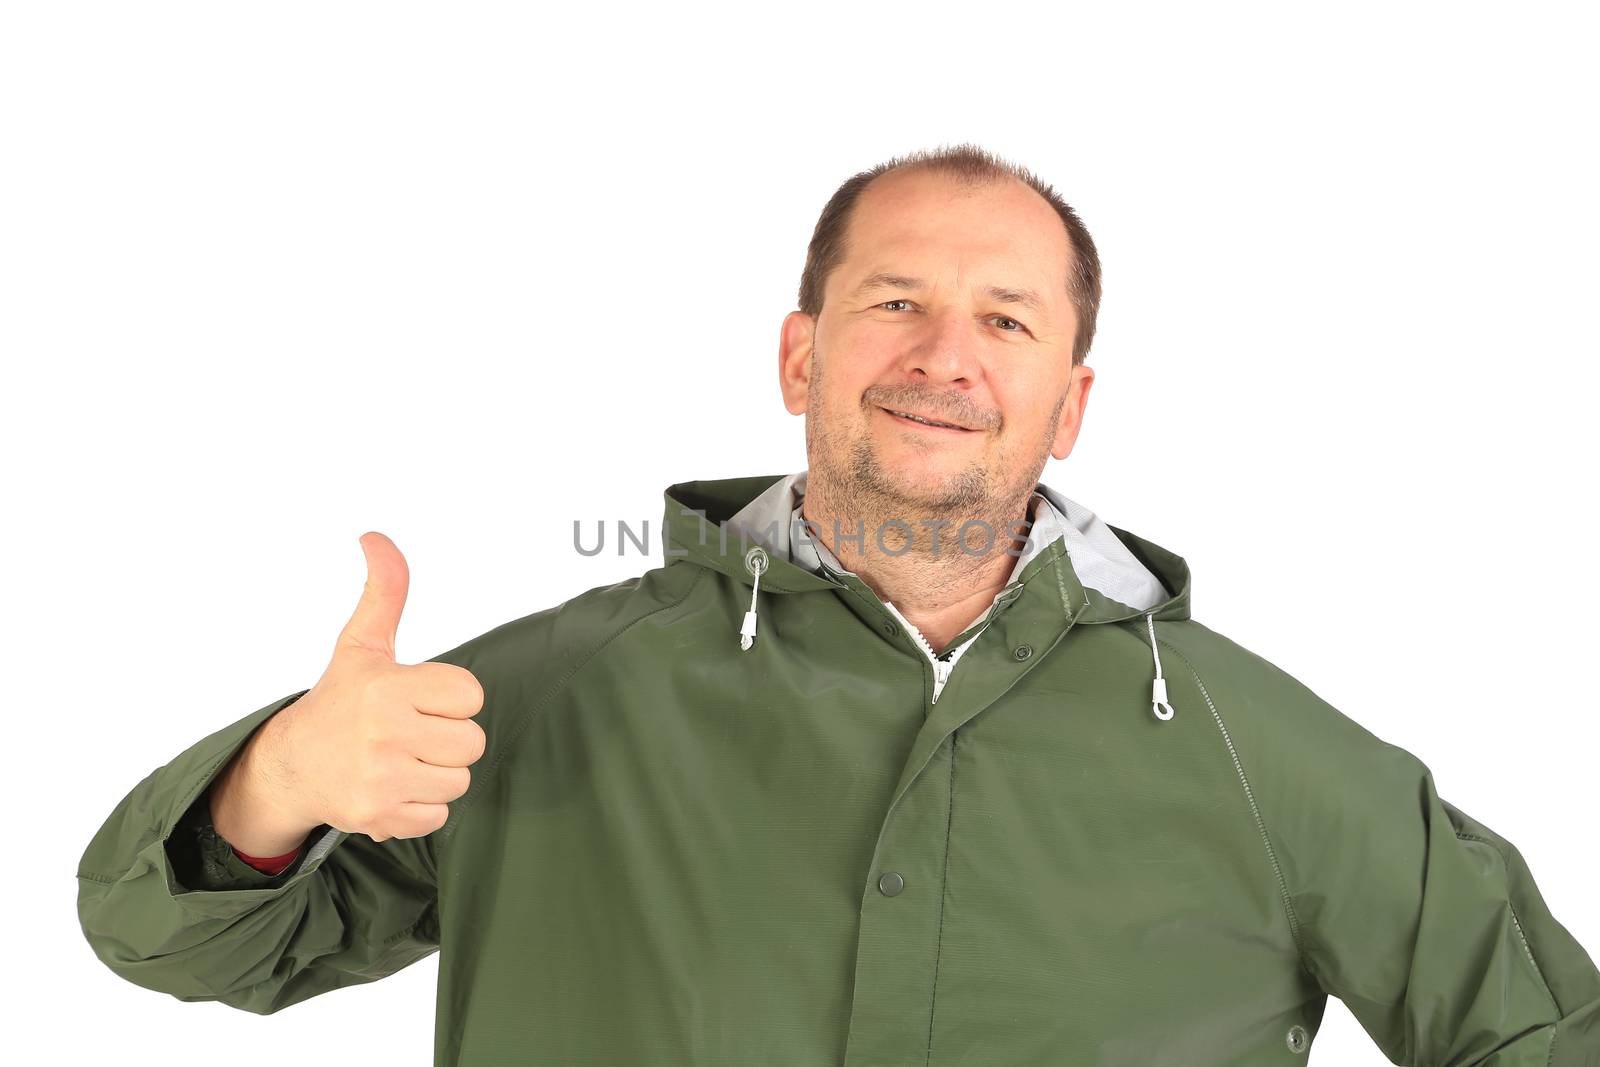 Man in coat shows thumb up. Isolated on a white background.